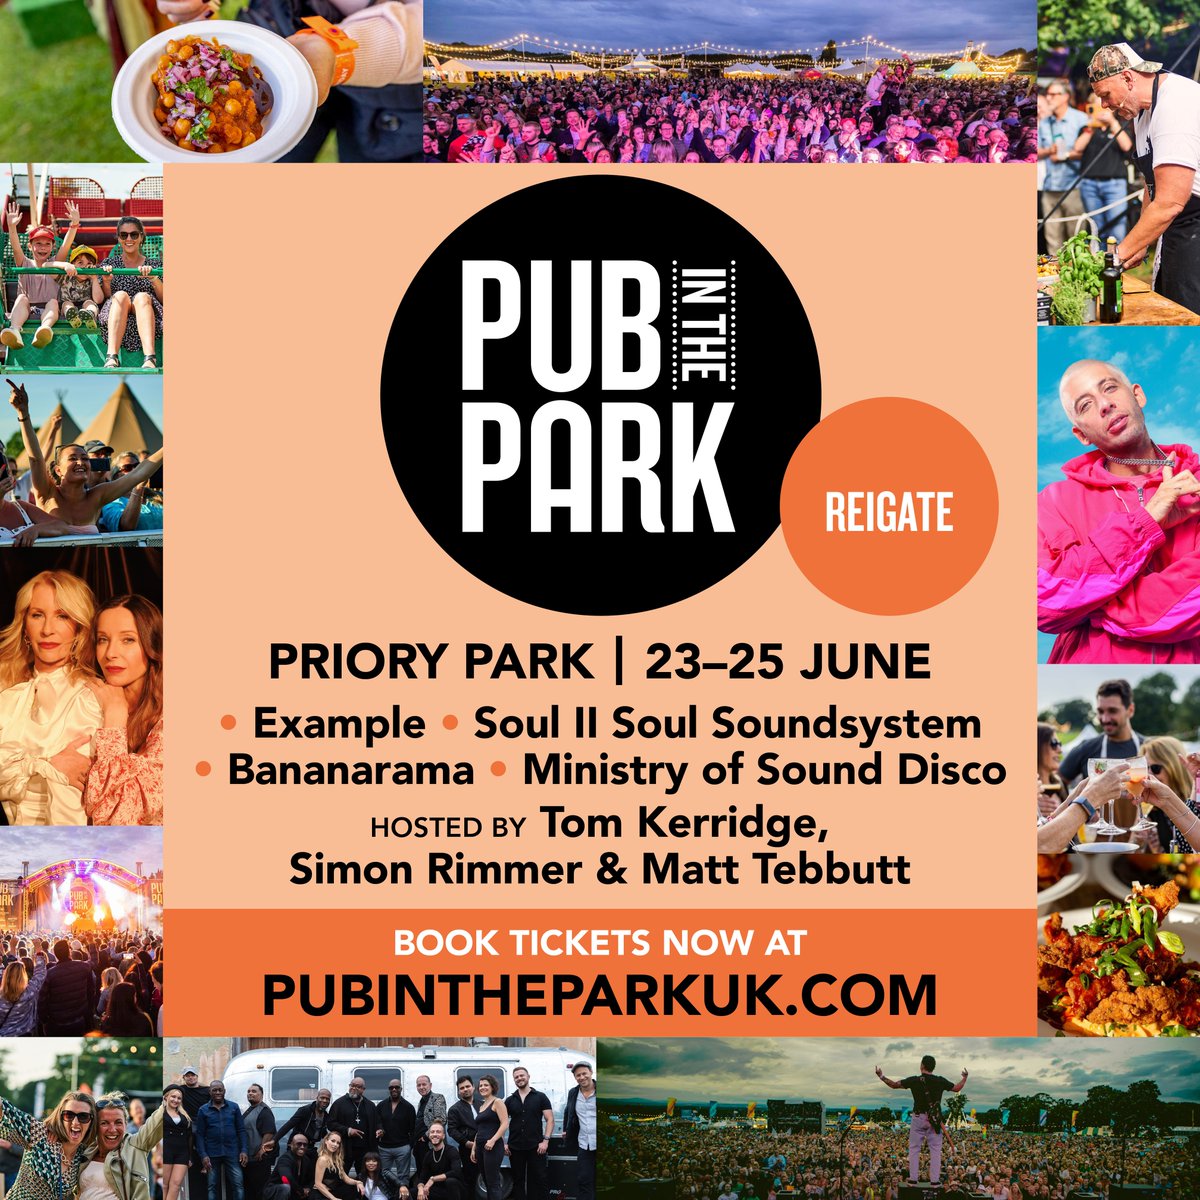 To all of you attending the Pub in the Park in Reigate tonight and over the weekend - have fun! It's forecast to be a hot one, so remember to drink plenty of water along with the food, drink and dancing! 💦🕺 🍺 🍕 #PITP #Reigate #PrioryPark #HotHotHot